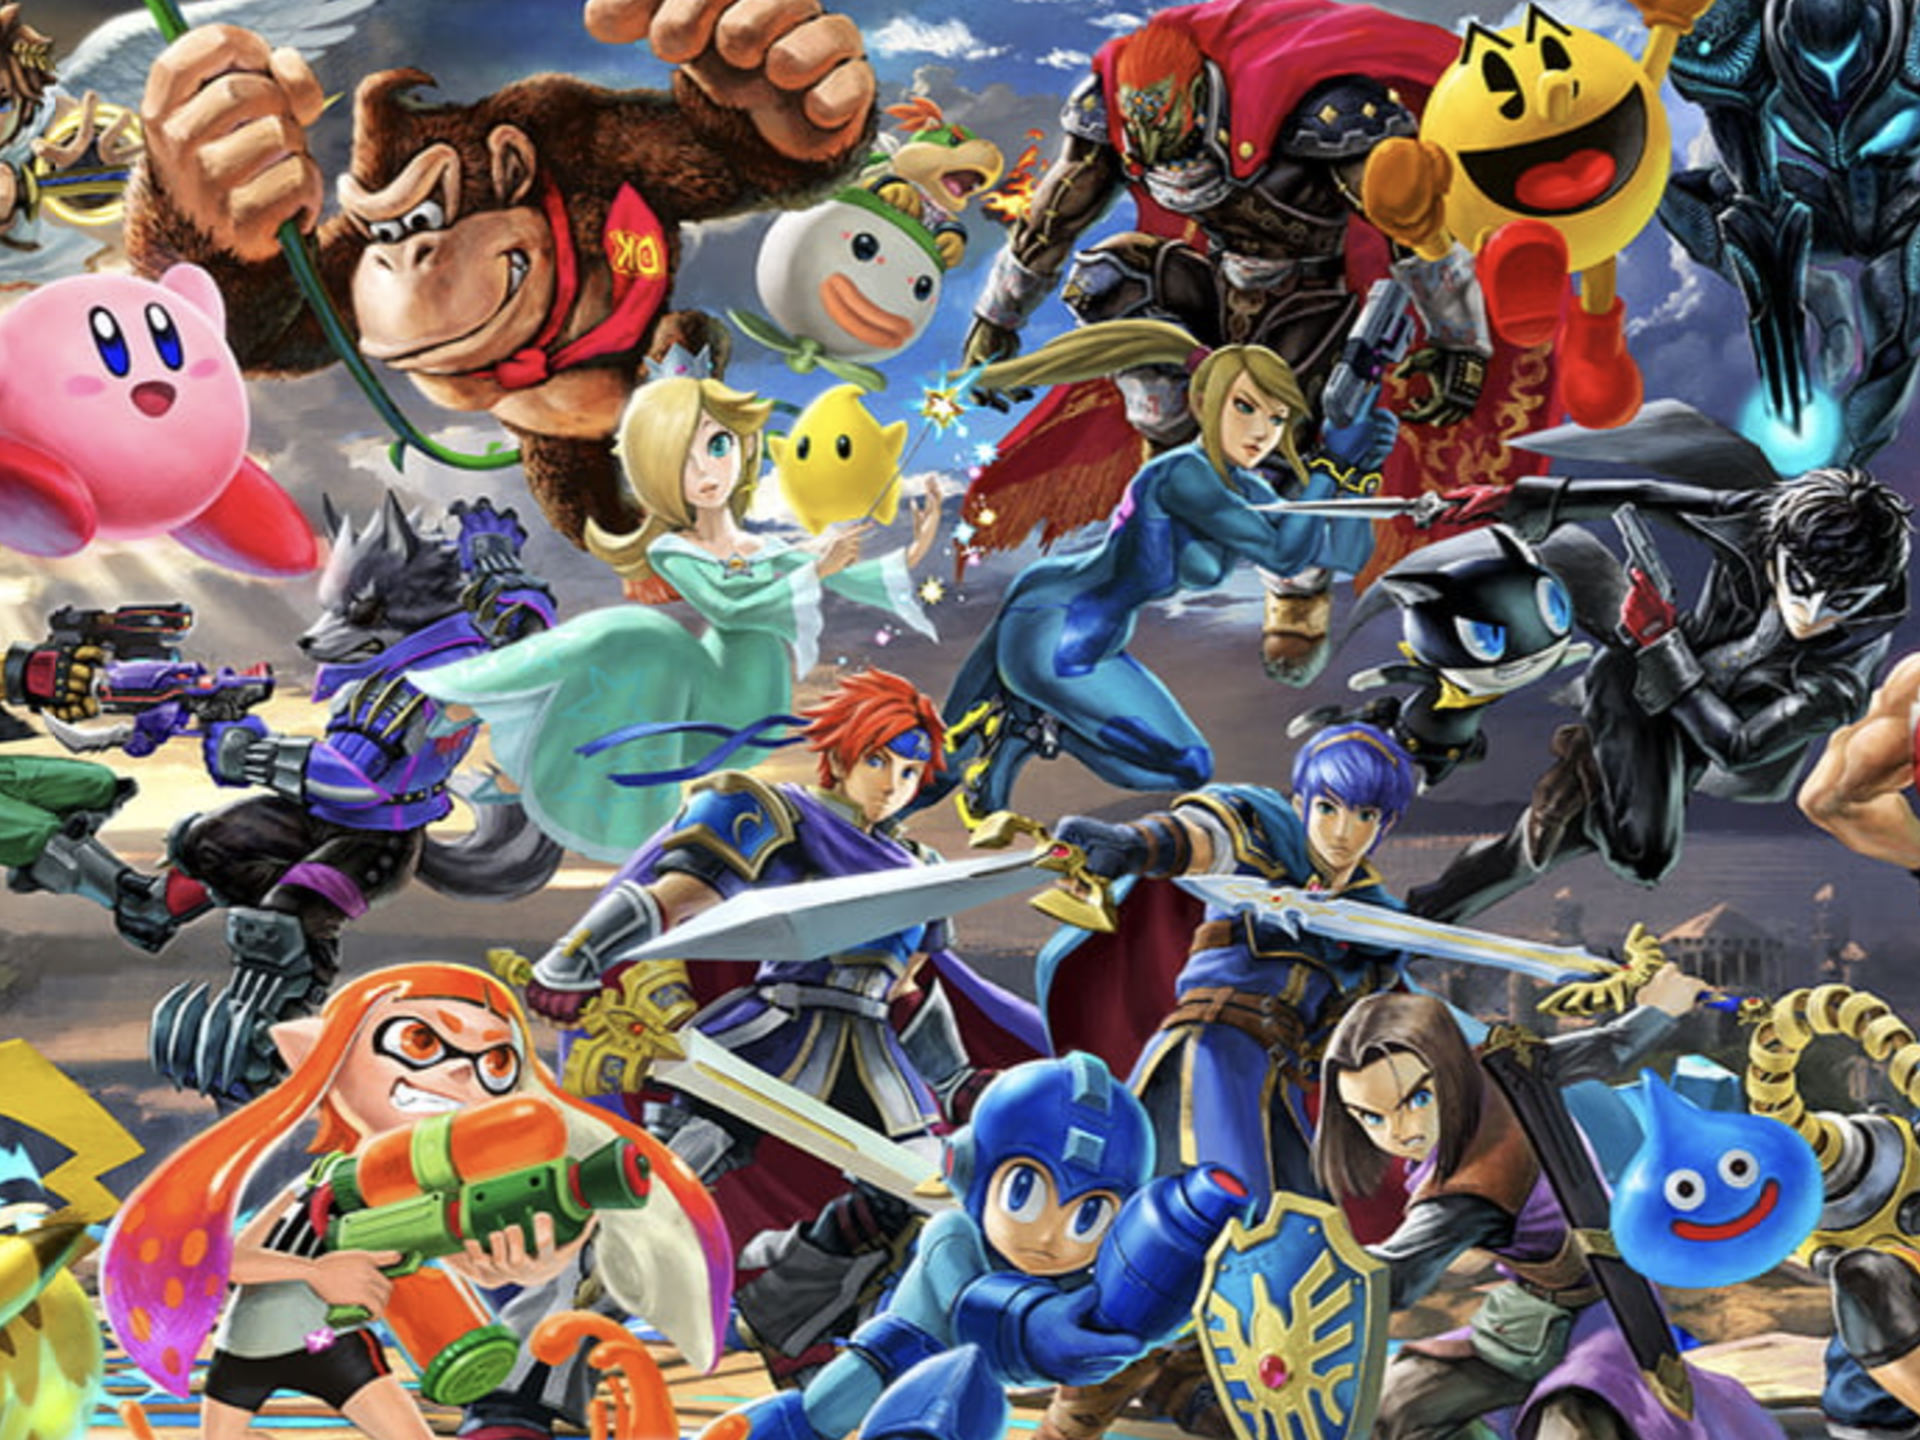 Super Smash Bros. Ultimate' is the best selling fighting game in US history